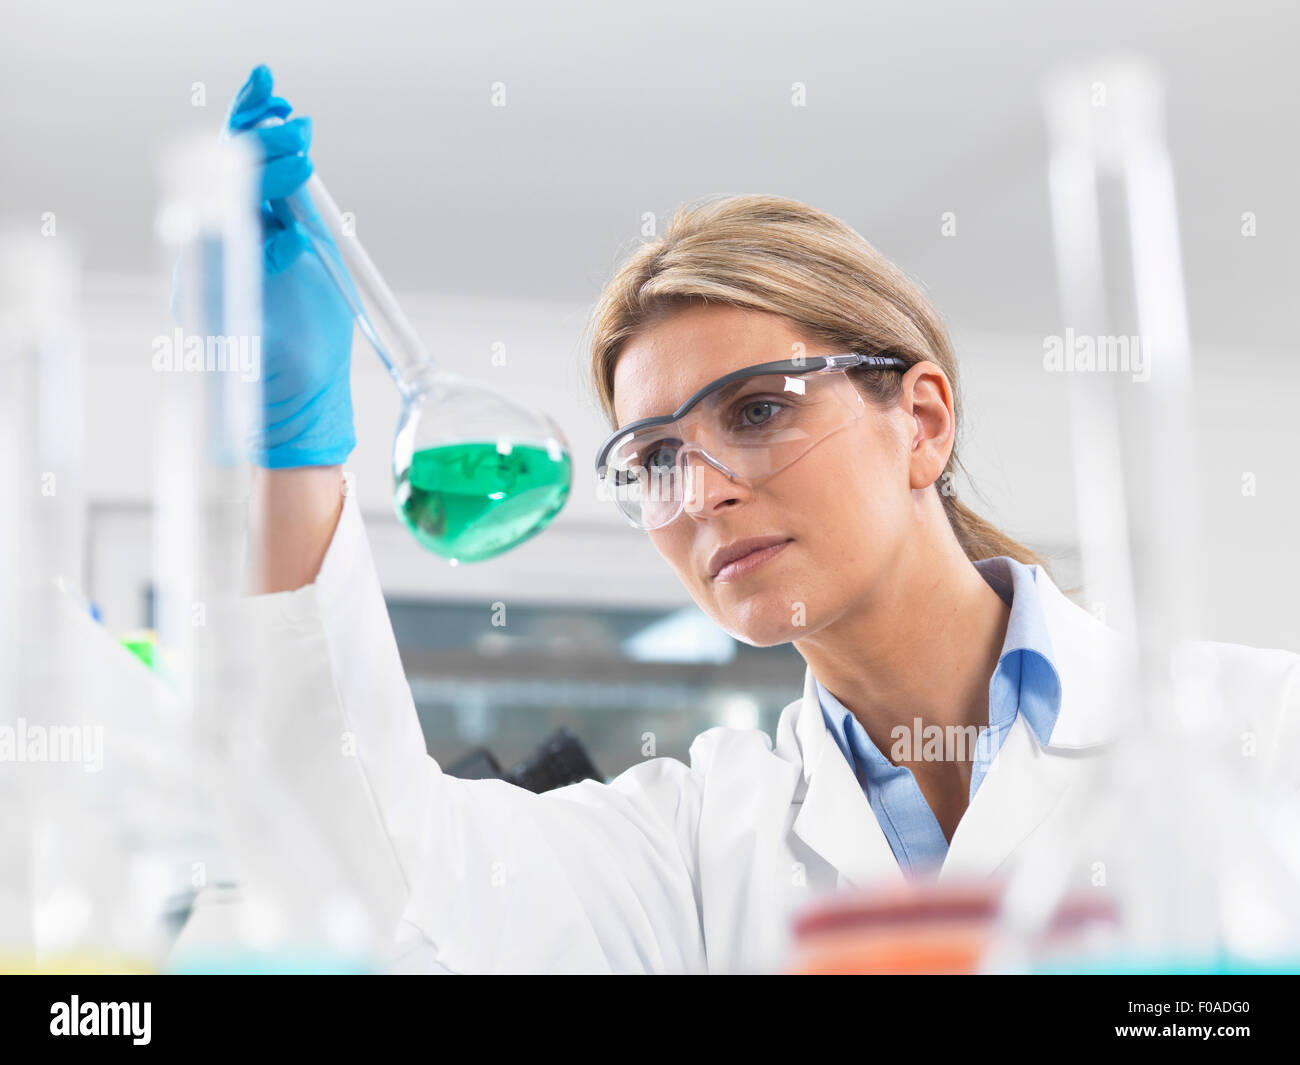 Scientist viewing chemical experiment in a laboratory Stock Photo